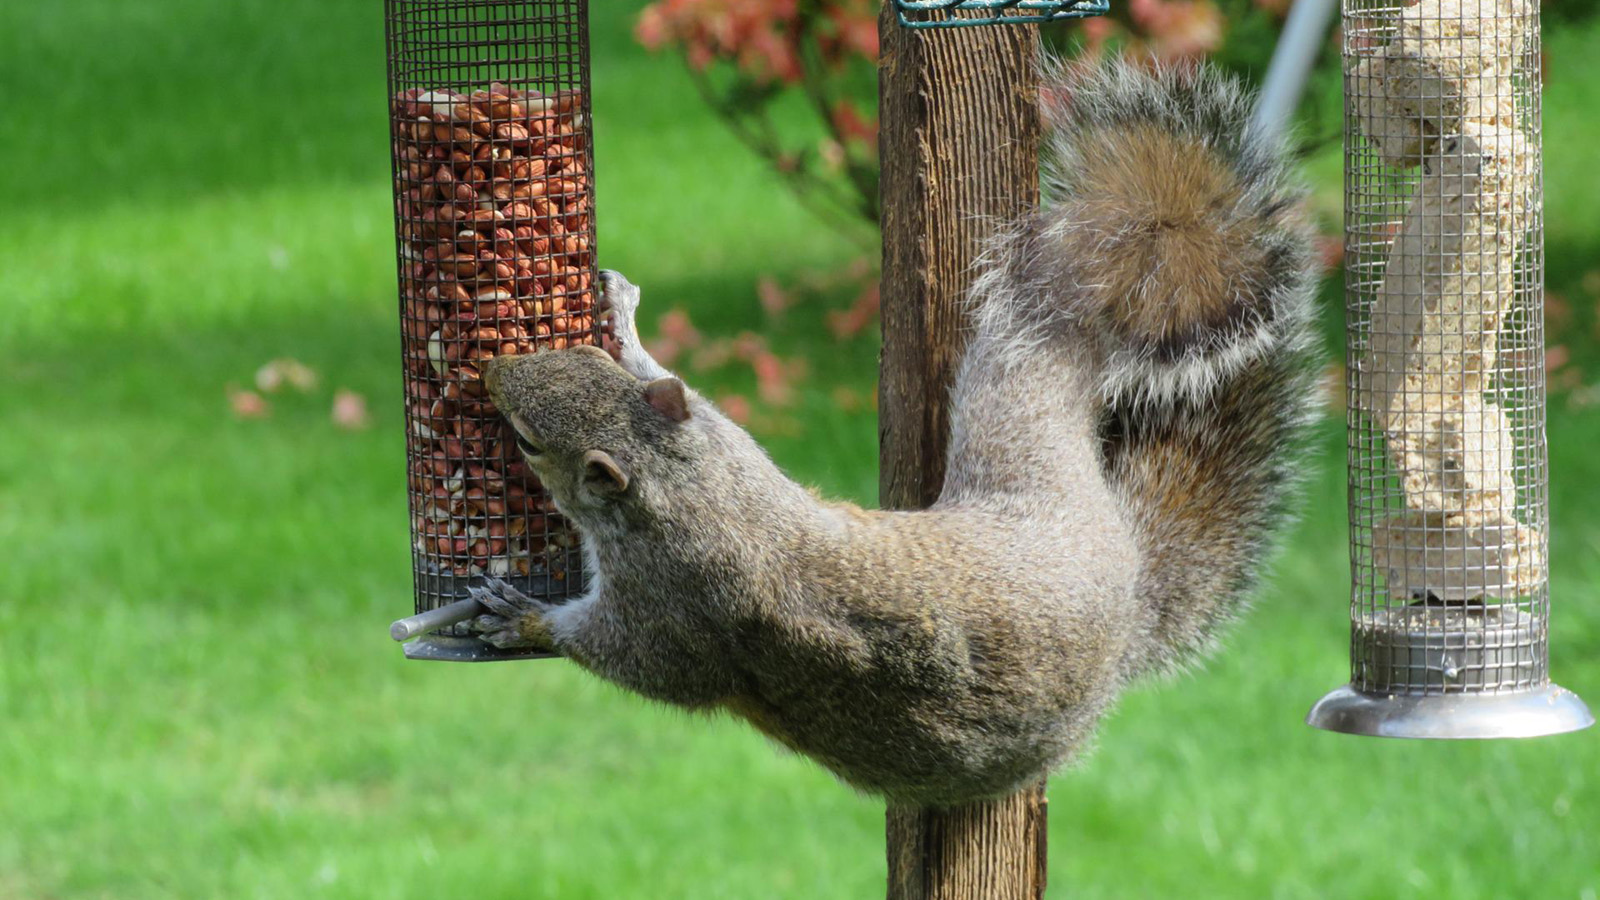 Had enough of squirrels? Try squirrel-proof bird feeders